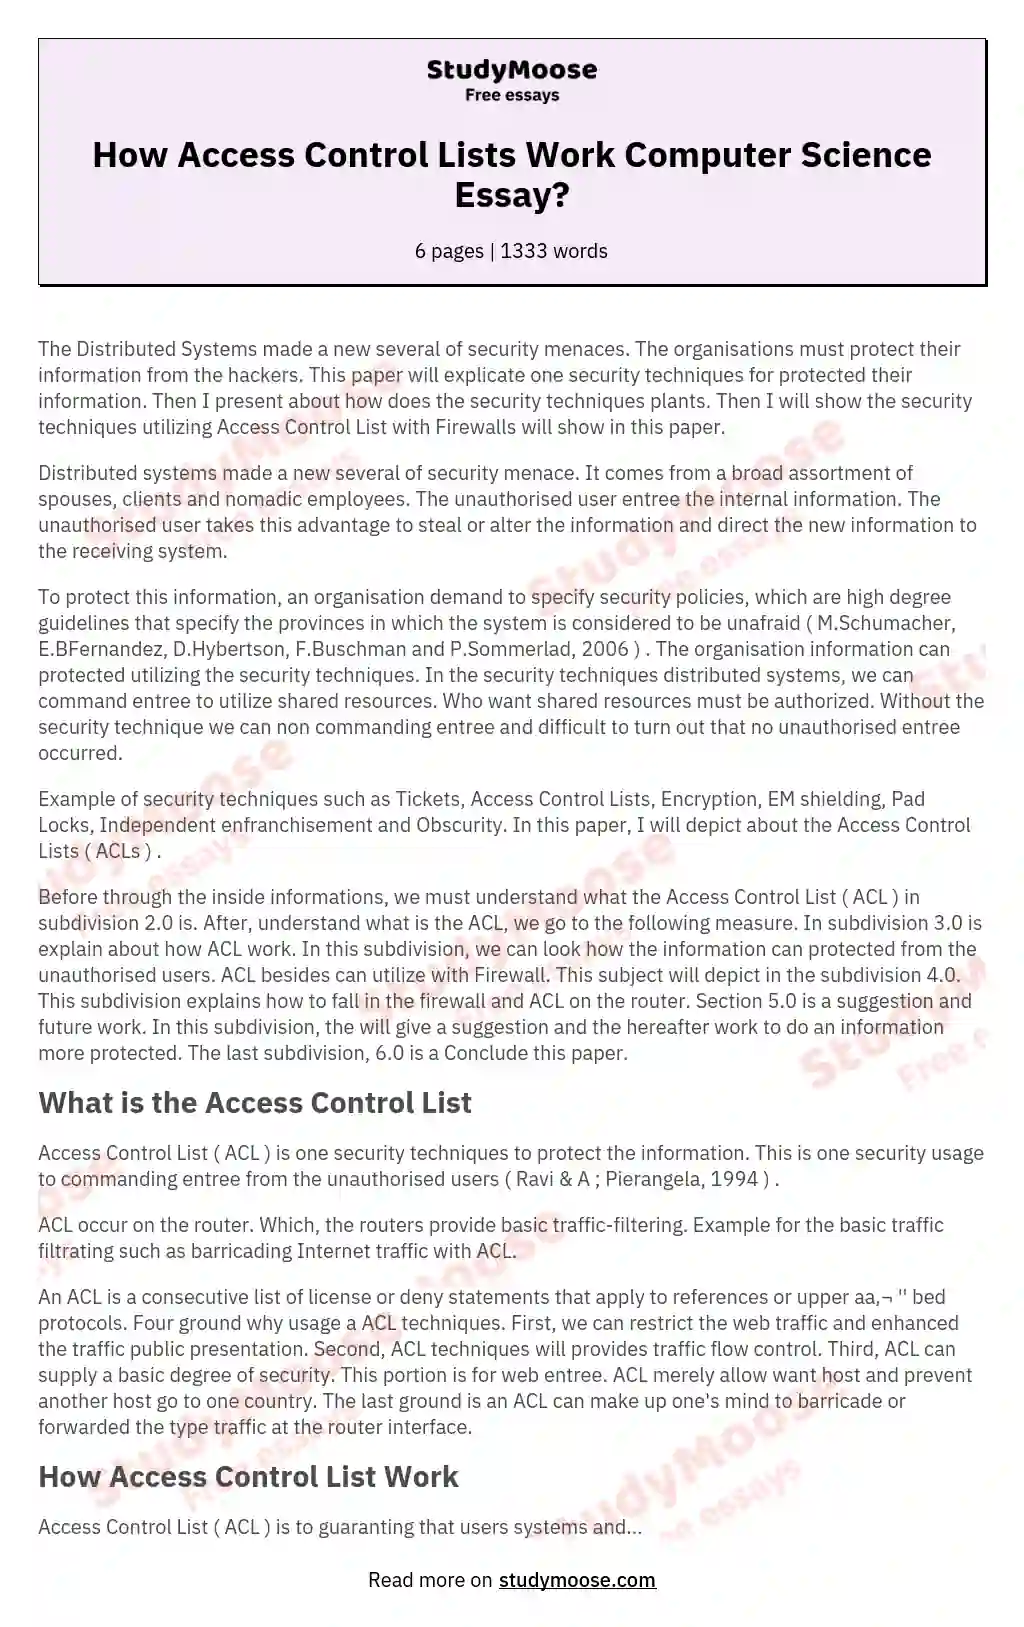 How Access Control Lists Work Computer Science Essay?